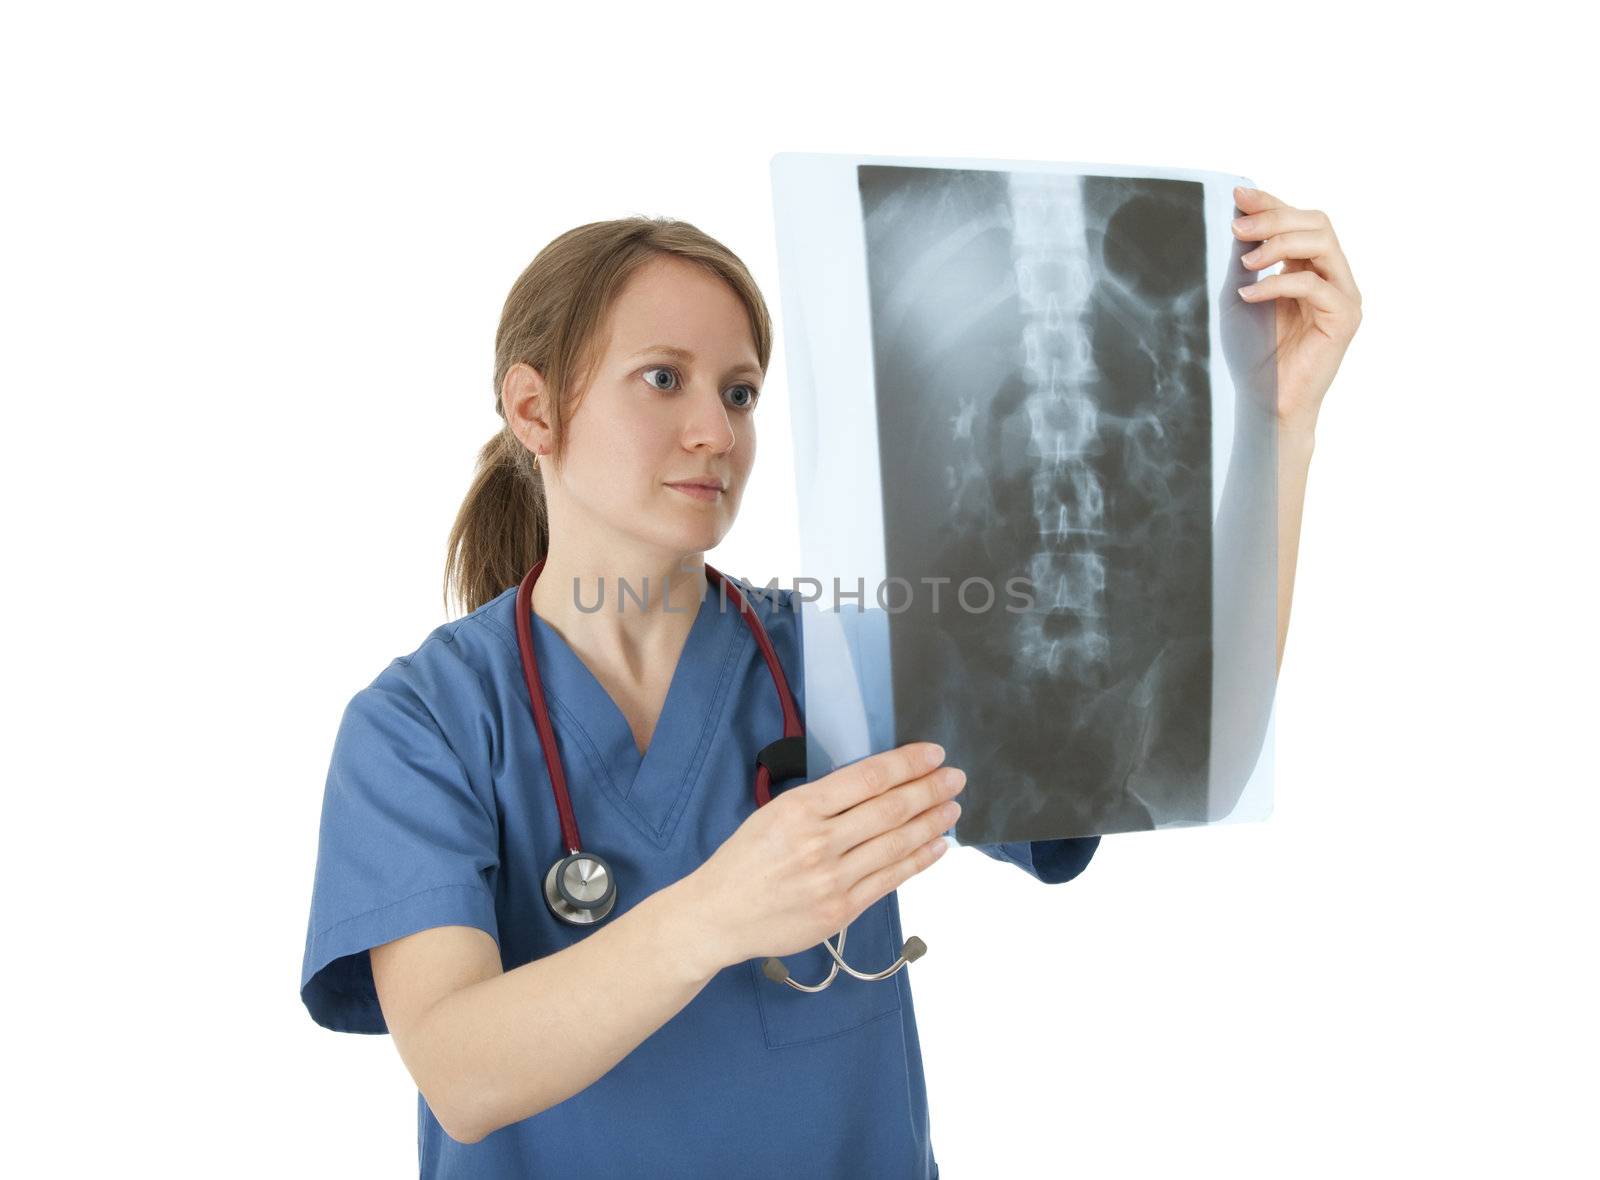 Young nurse studying x-ray image, isolated on white.